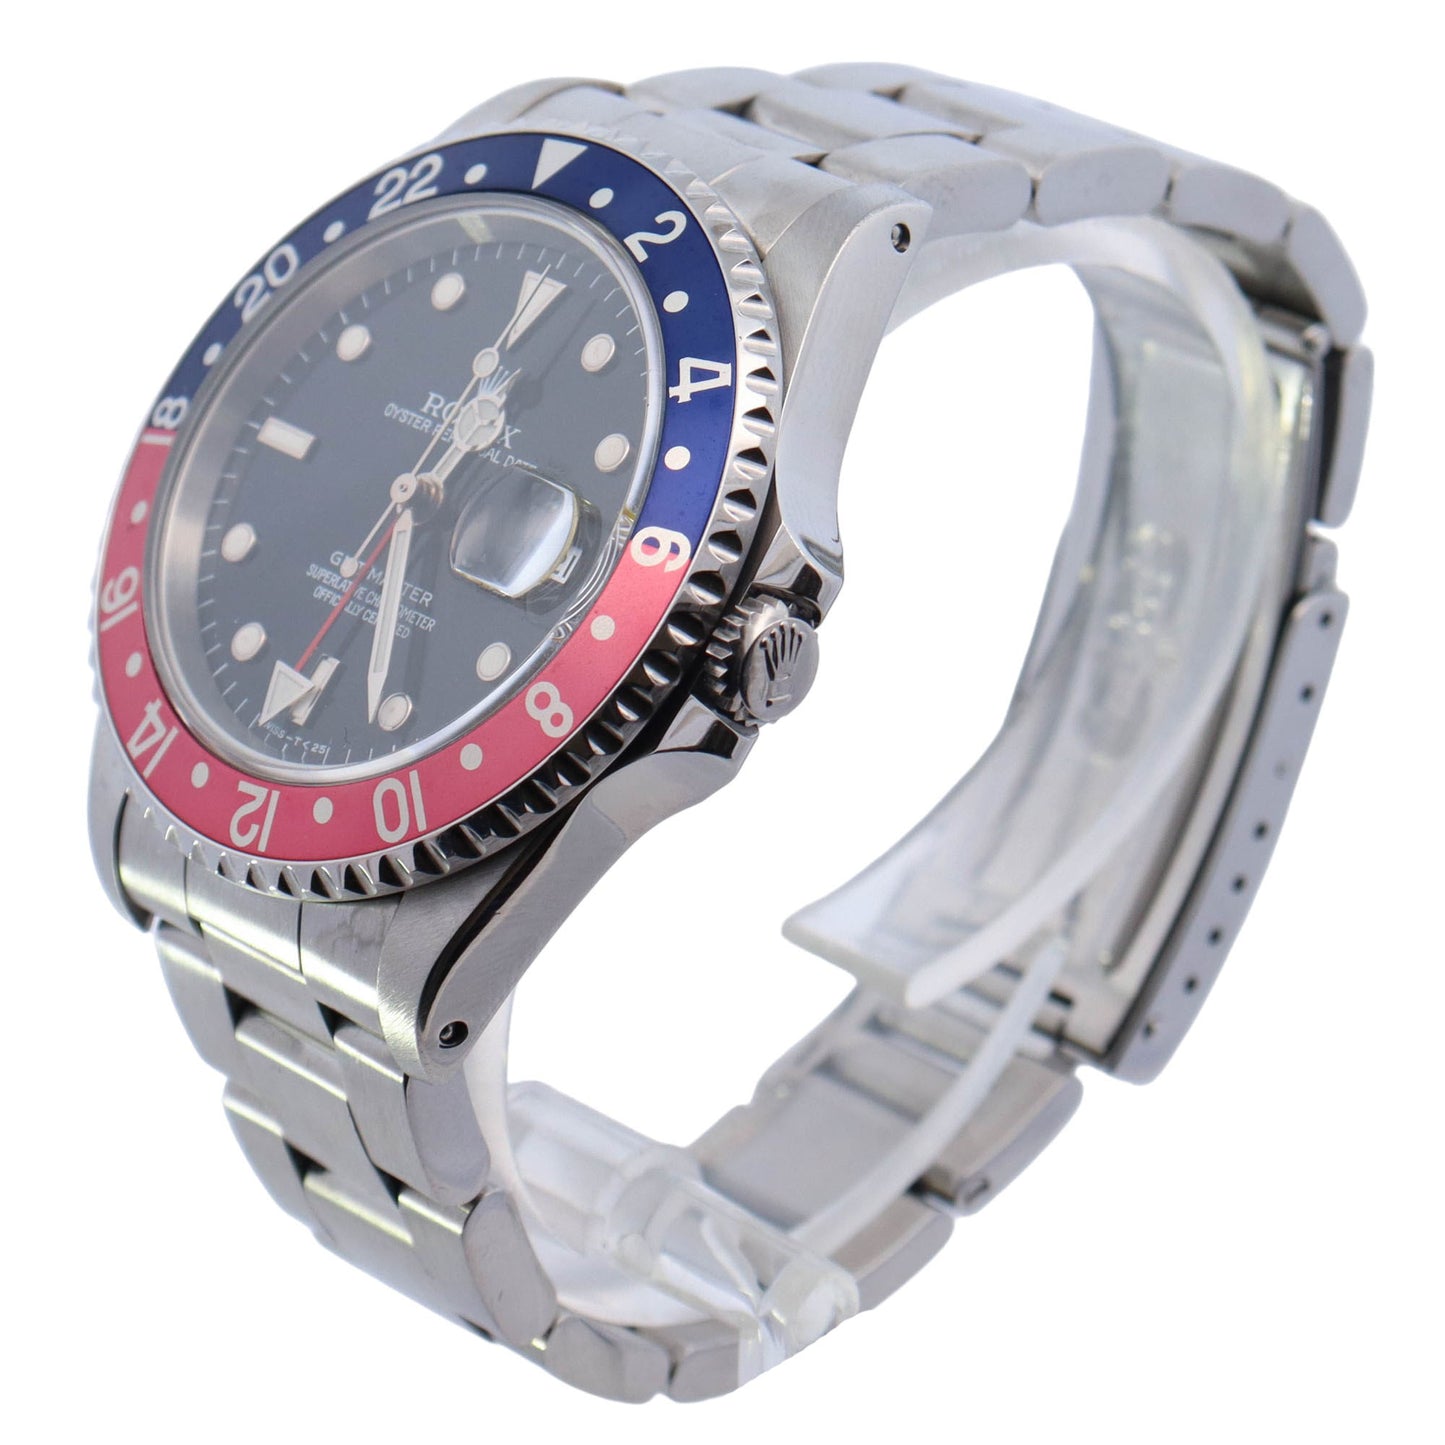 Rolex GMT-Master "Pepsi" Stainless Steel 40mm Black Dot Dial Watch Reference# 16700 - Happy Jewelers Fine Jewelry Lifetime Warranty